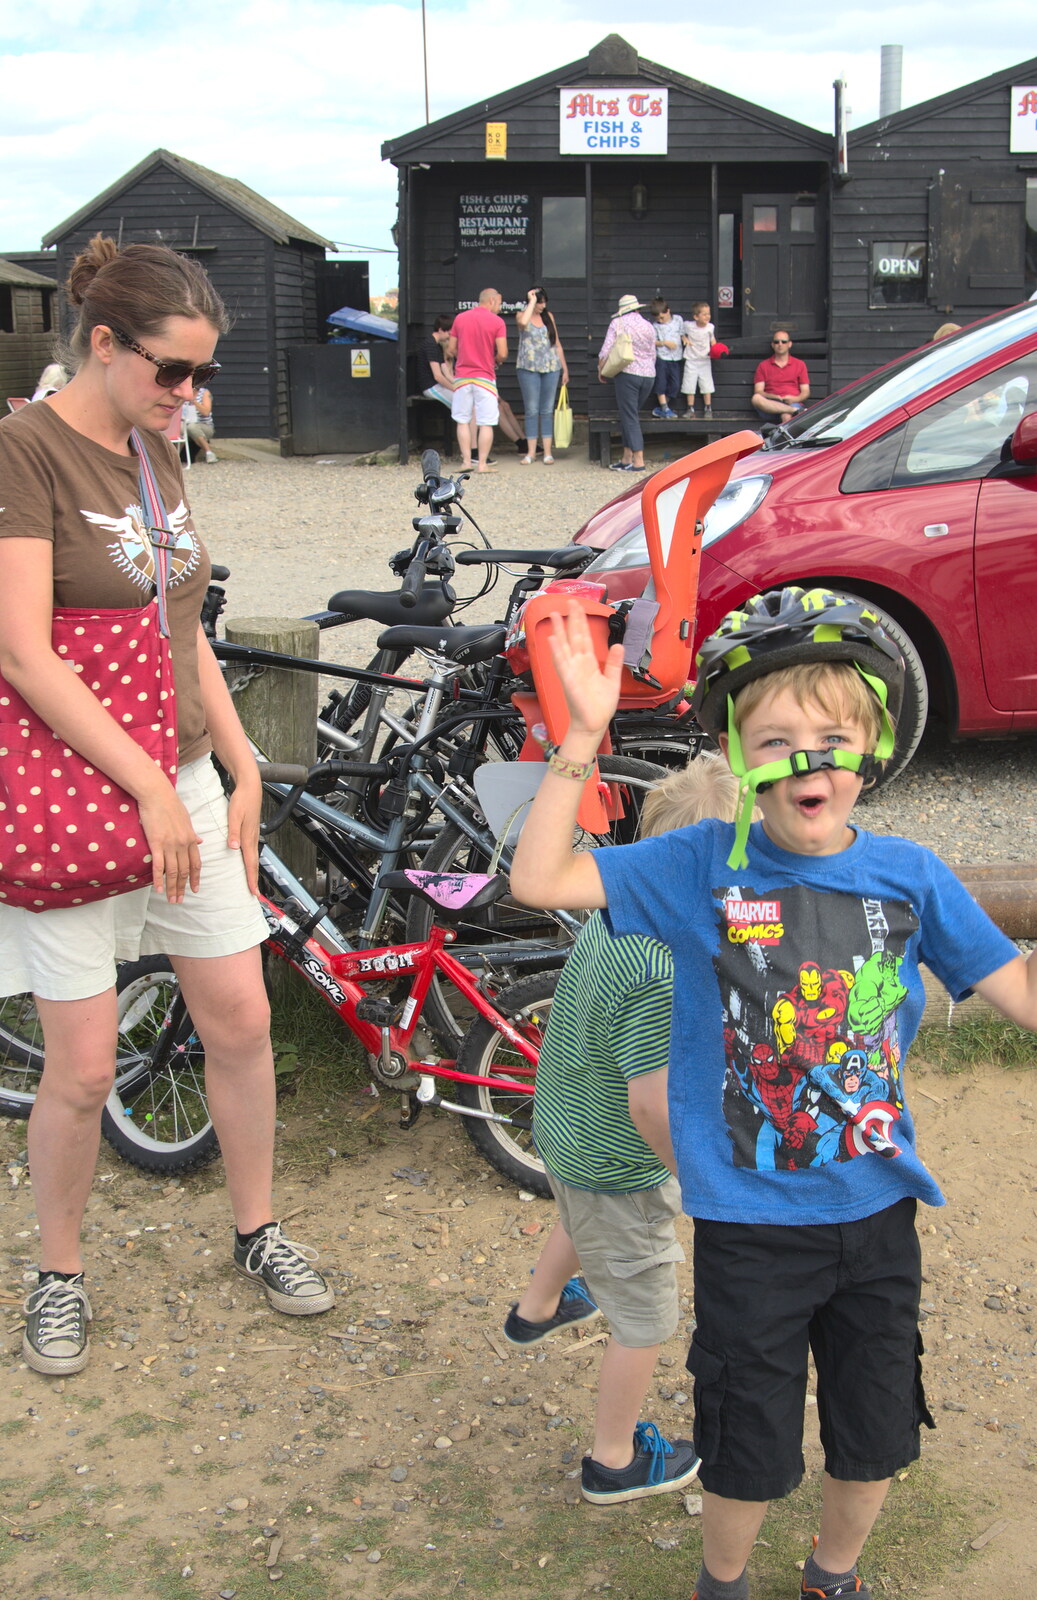 Fred gets tangled in a cycle helmet from The Danger of Trees: A Camping (Mis)adventure - Southwold, Suffolk - 3rd August 2015